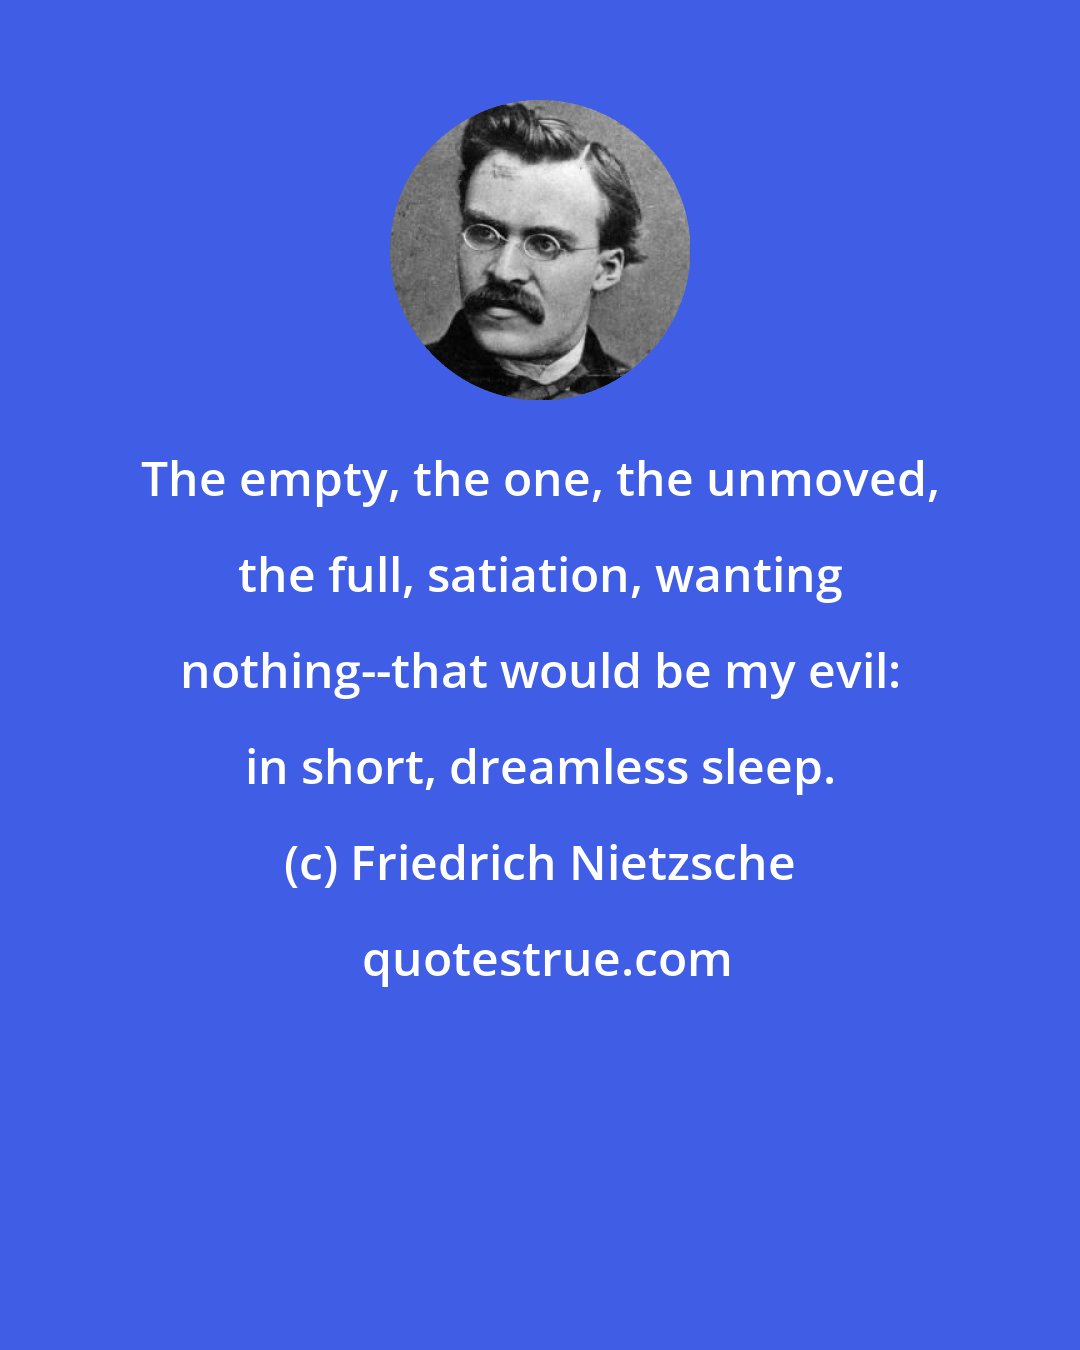 Friedrich Nietzsche: The empty, the one, the unmoved, the full, satiation, wanting nothing--that would be my evil: in short, dreamless sleep.